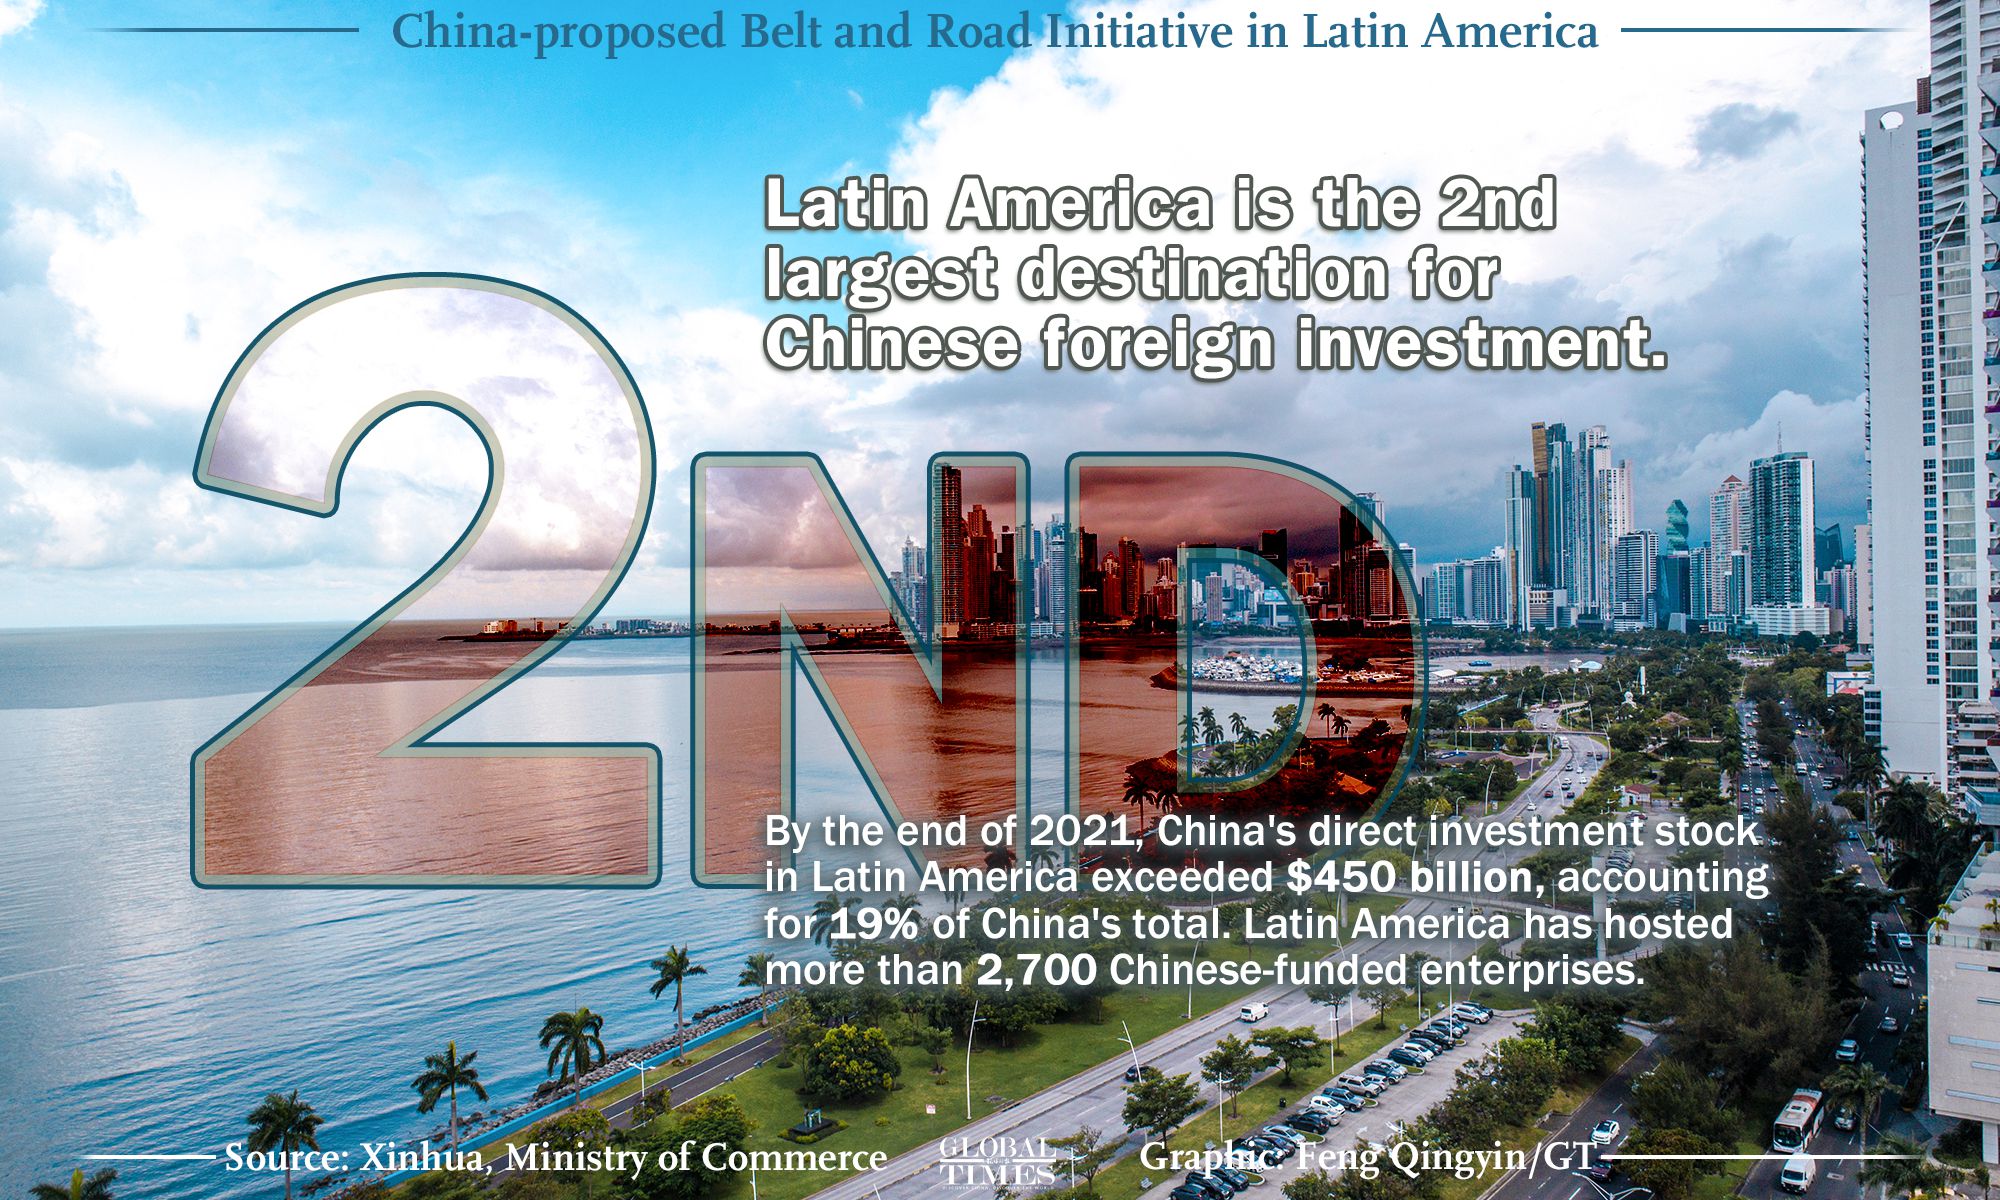 China-proposed Belt and Road Initiative in Latin America Graphic: Feng Qingyin/GT